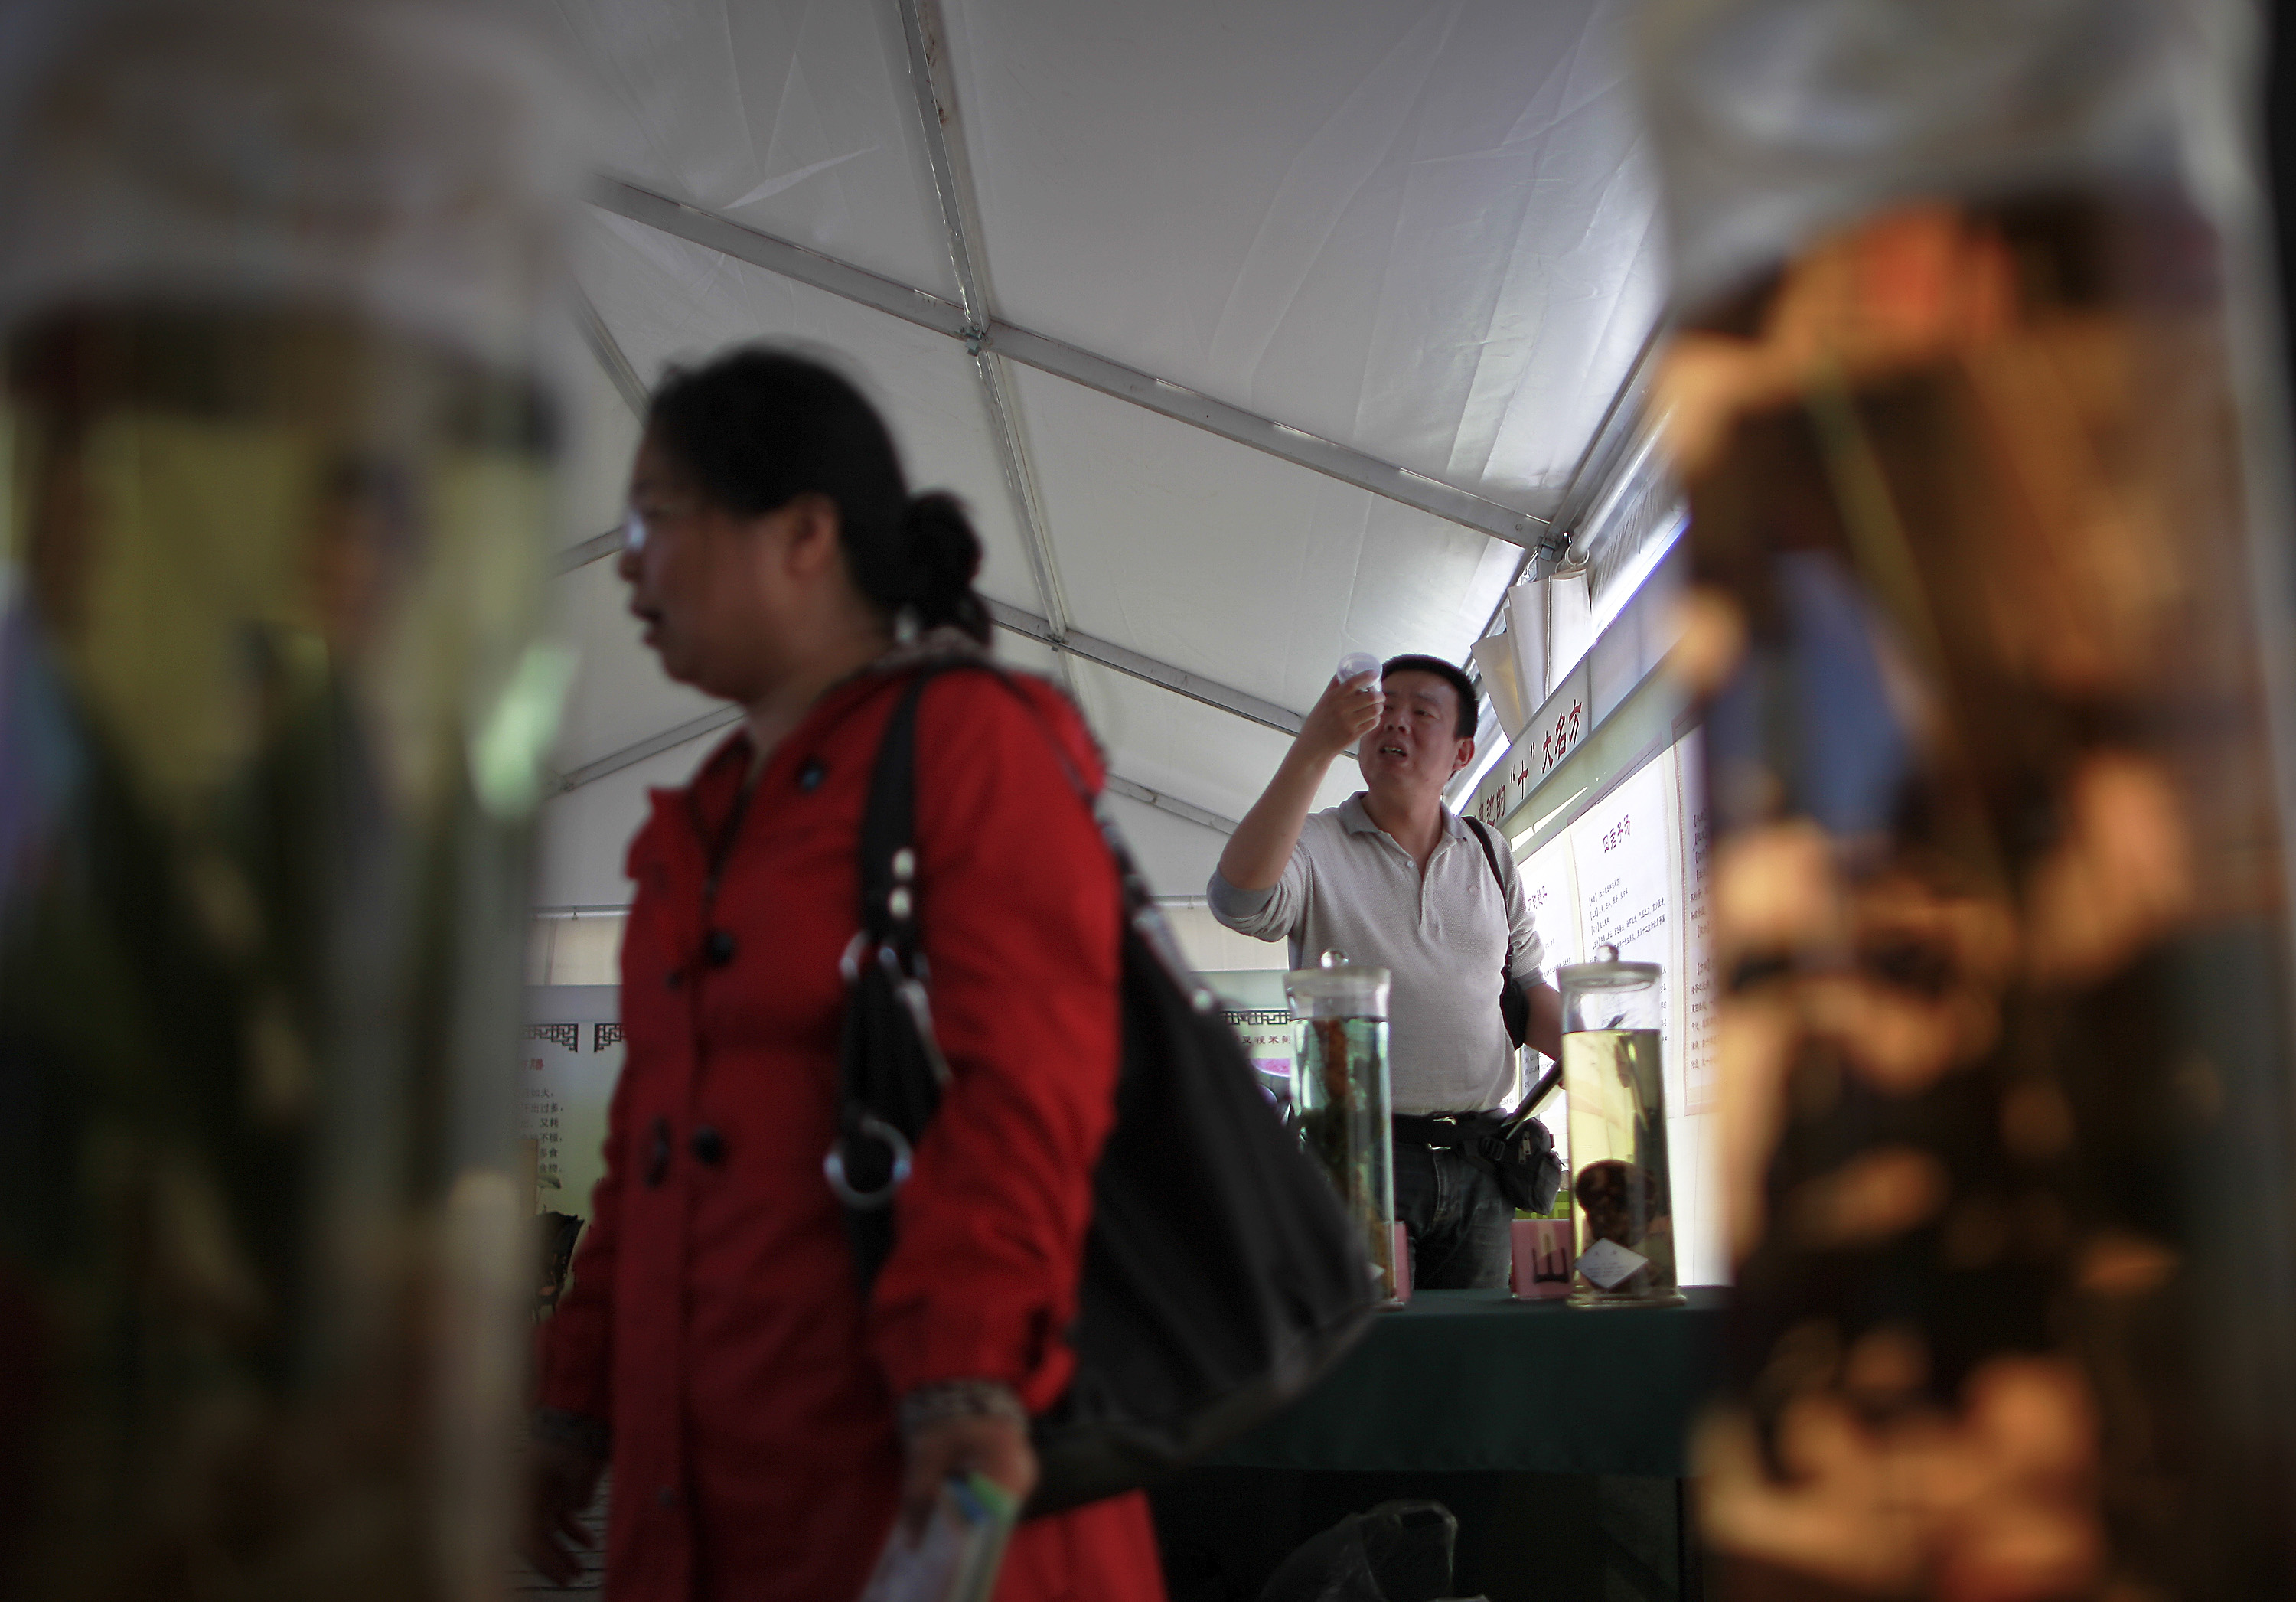 A Chinese man takes a closer look at a Chinese medicine on display at a booth during a Health Culture Festival held at the Ditan Park in Beijing, China Friday, May 13, 2011. [Photo: AP]